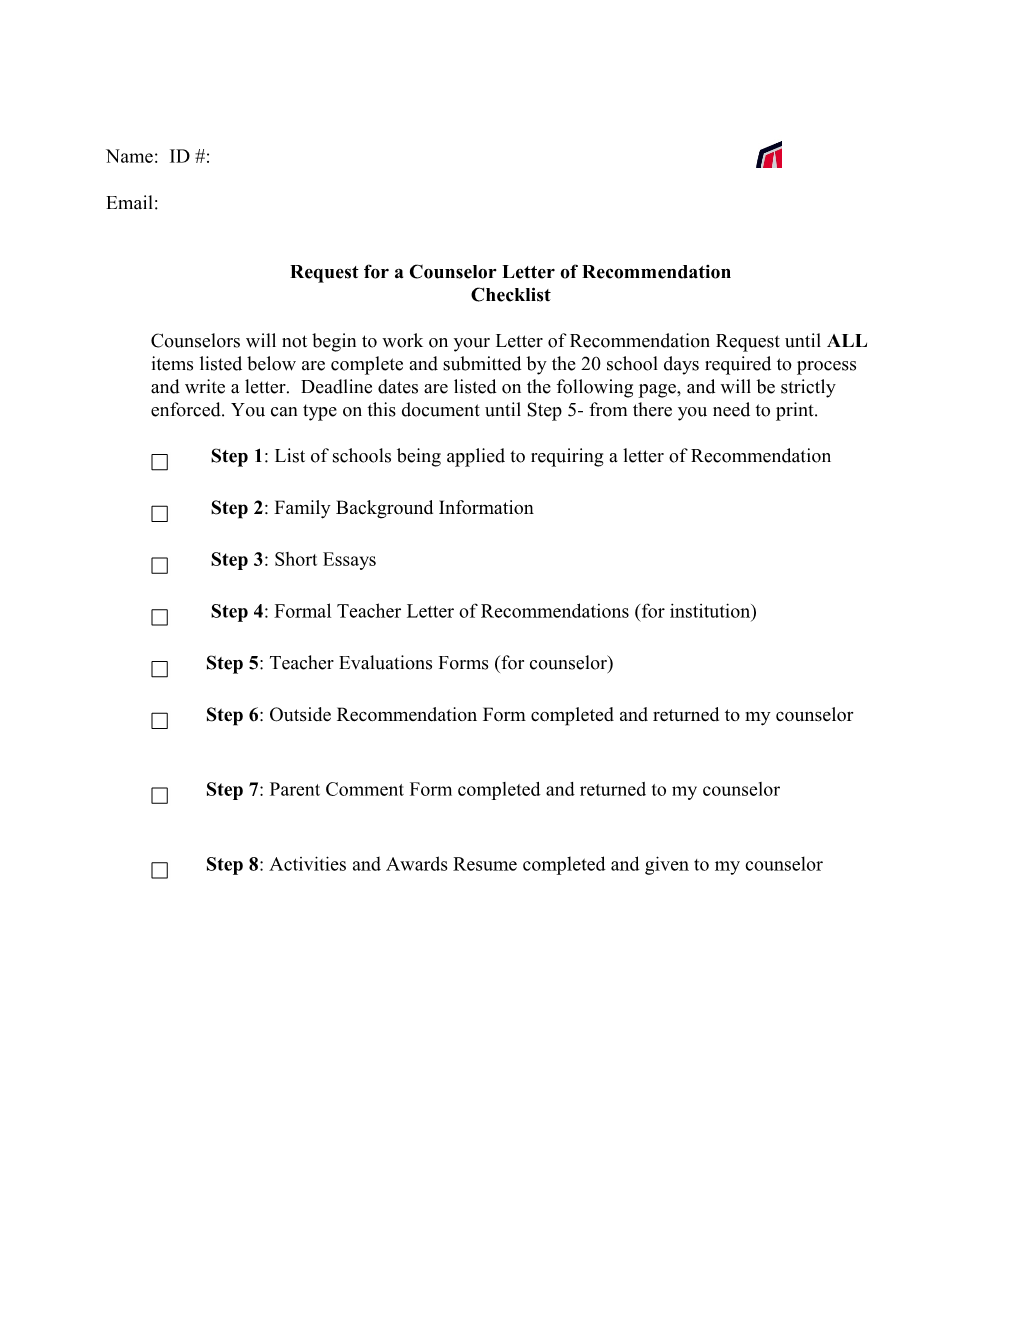 Request for a Counselor Letter of Recommendation